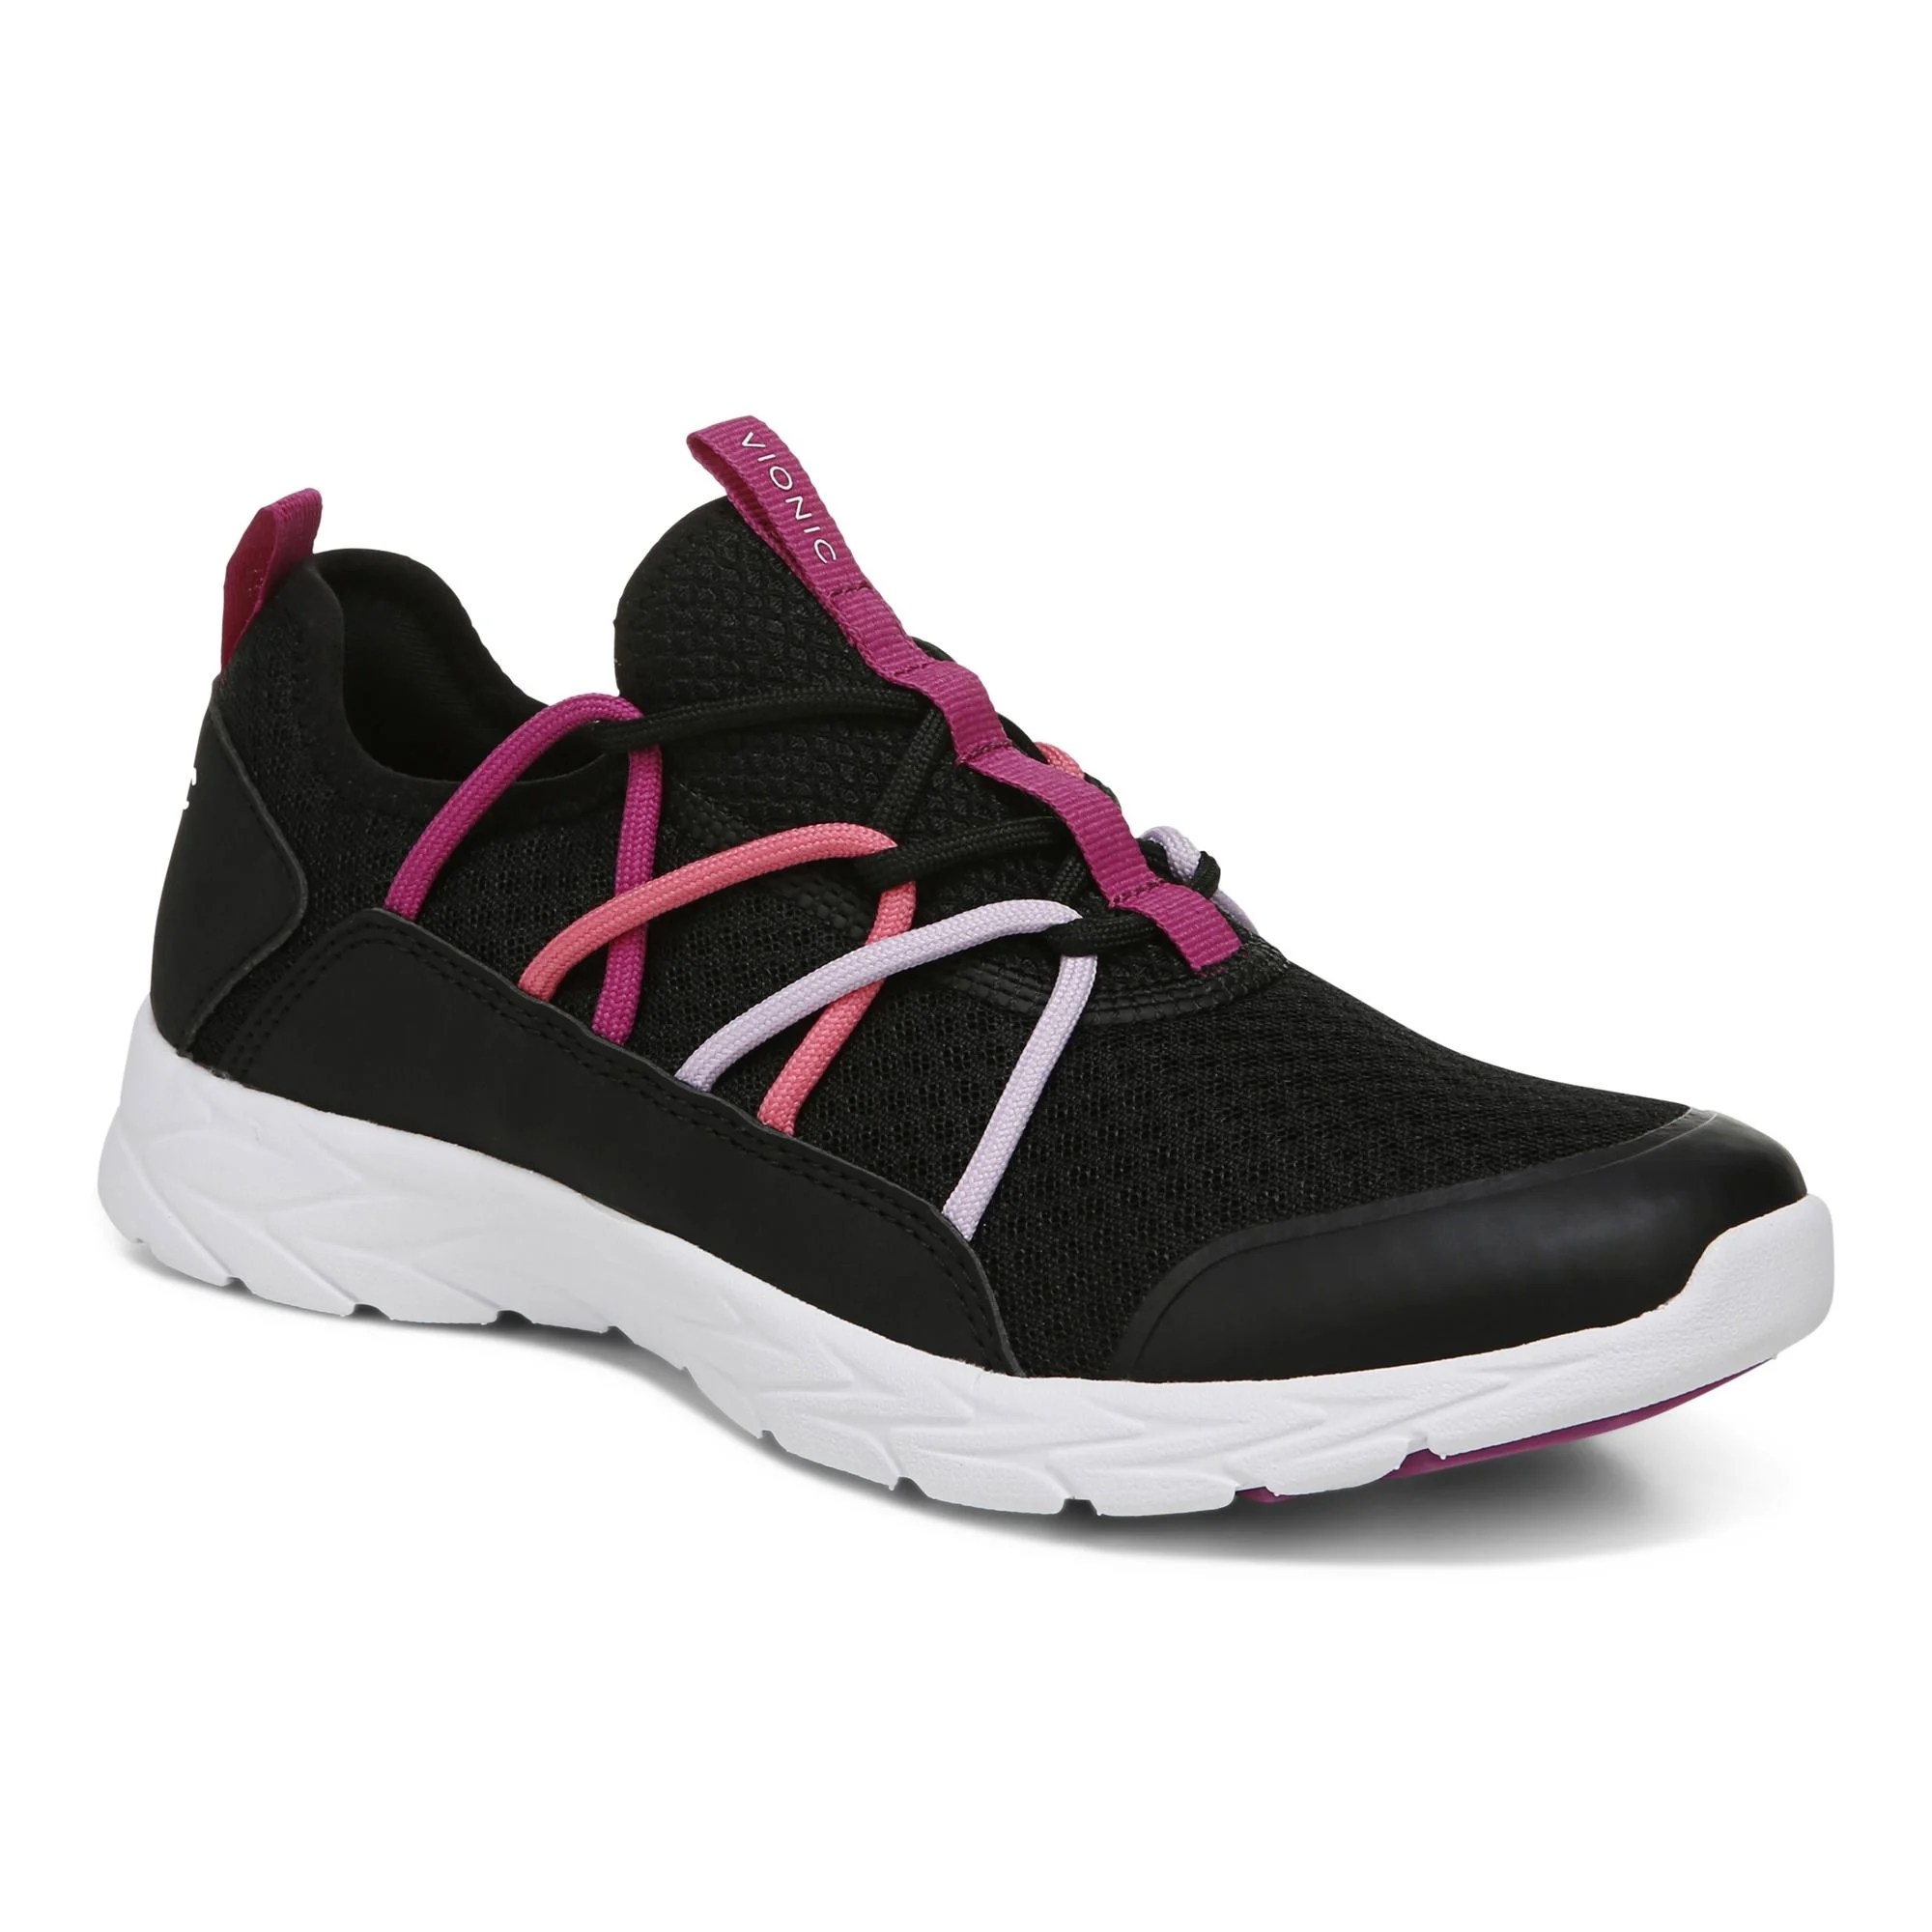 a black sneaker with elastic laces in pink and white from Vionic